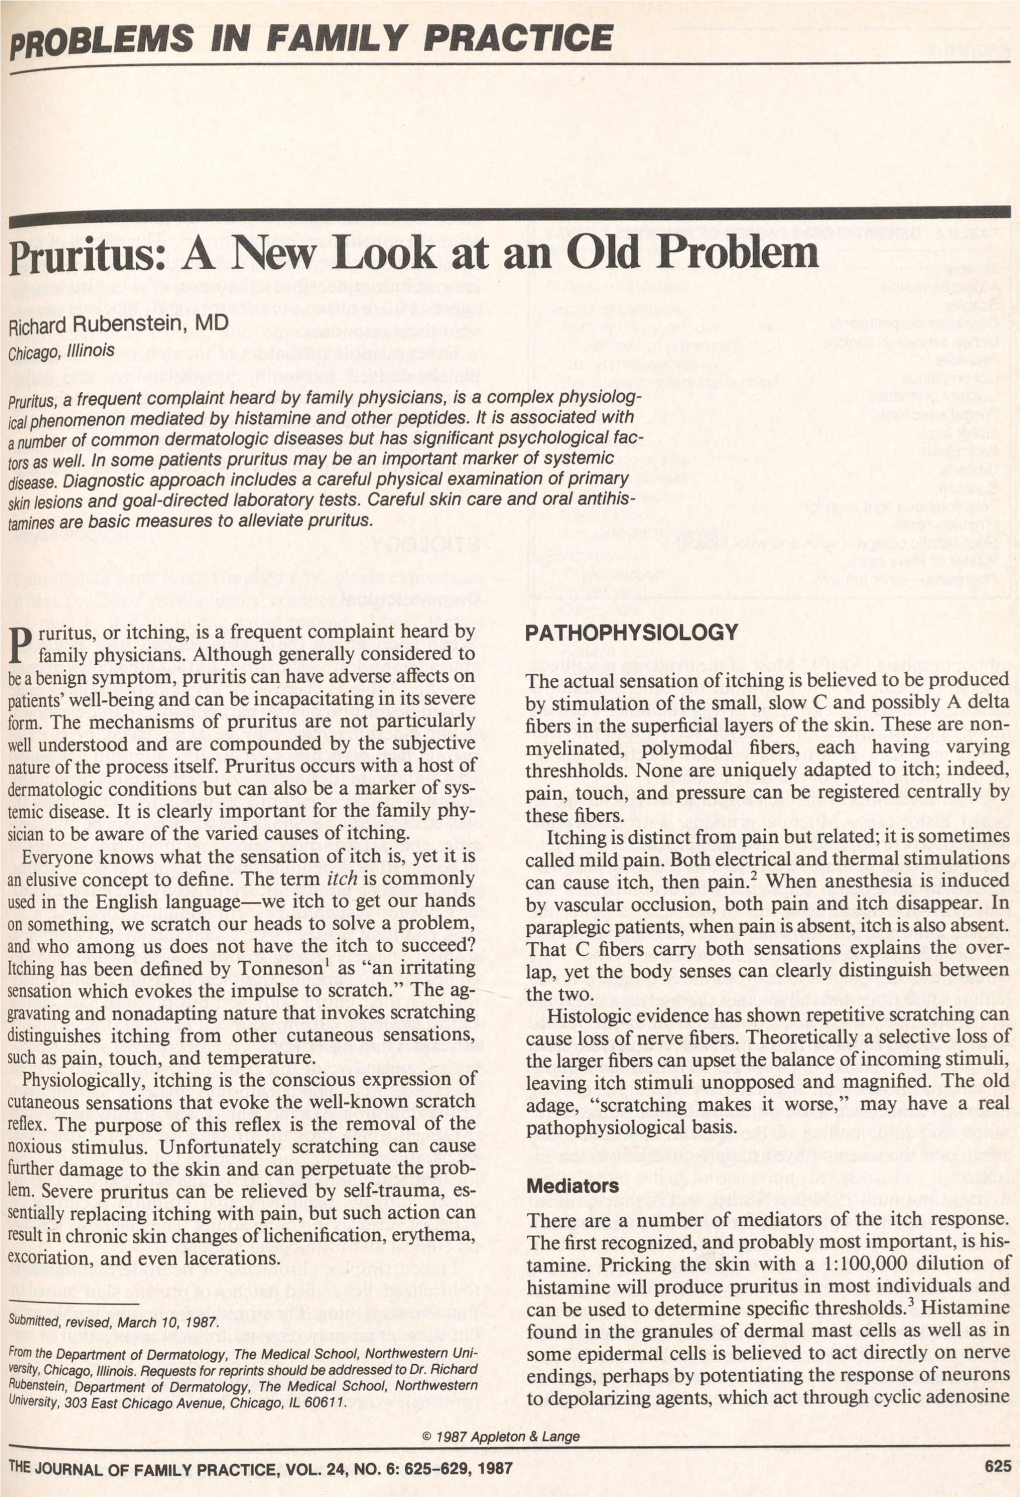 Pruritus: a New Look at an Old Problem